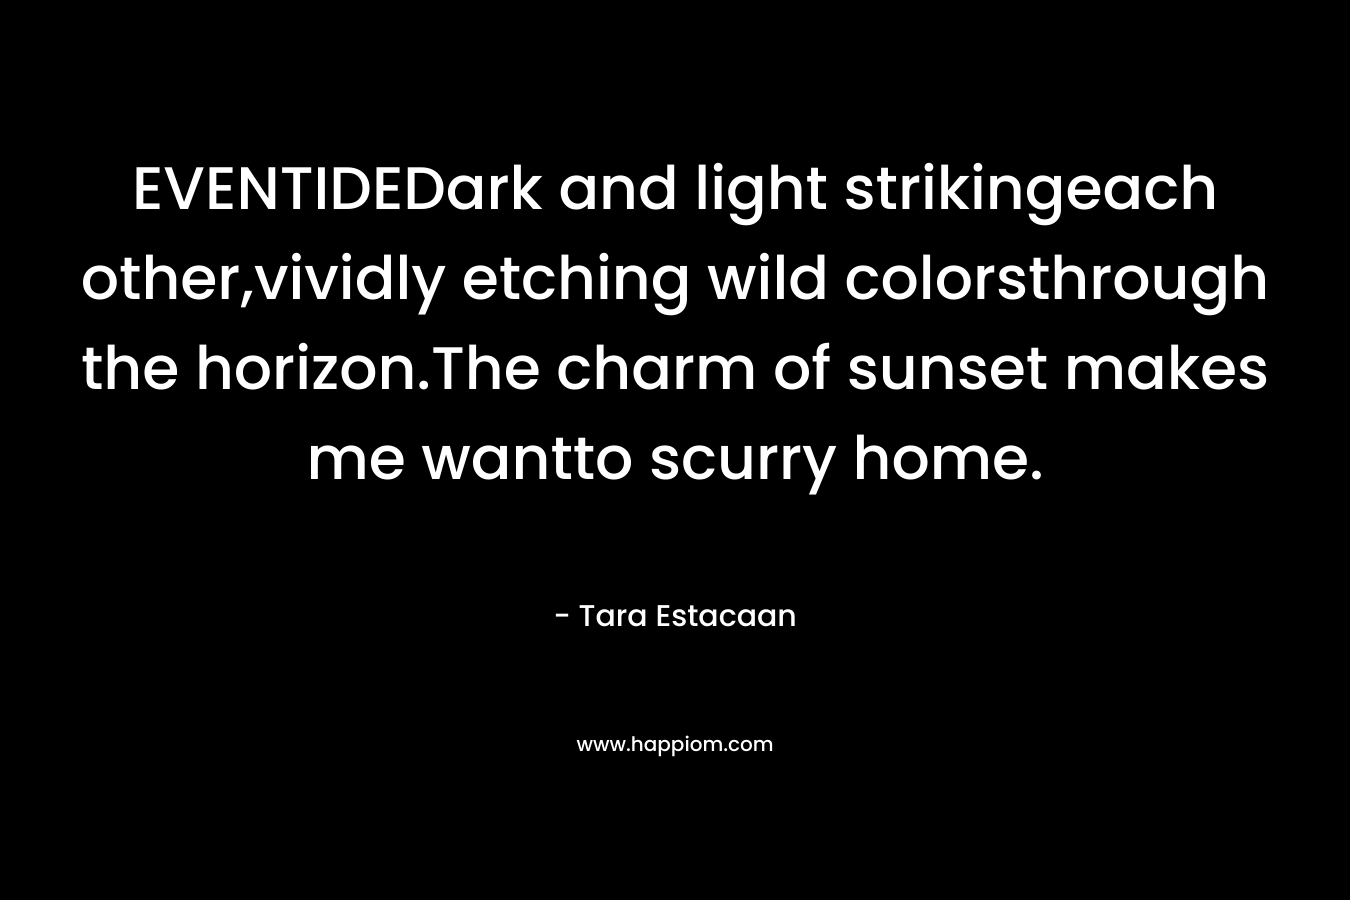 EVENTIDEDark and light strikingeach other,vividly etching wild colorsthrough the horizon.The charm of sunset makes me wantto scurry home. – Tara Estacaan